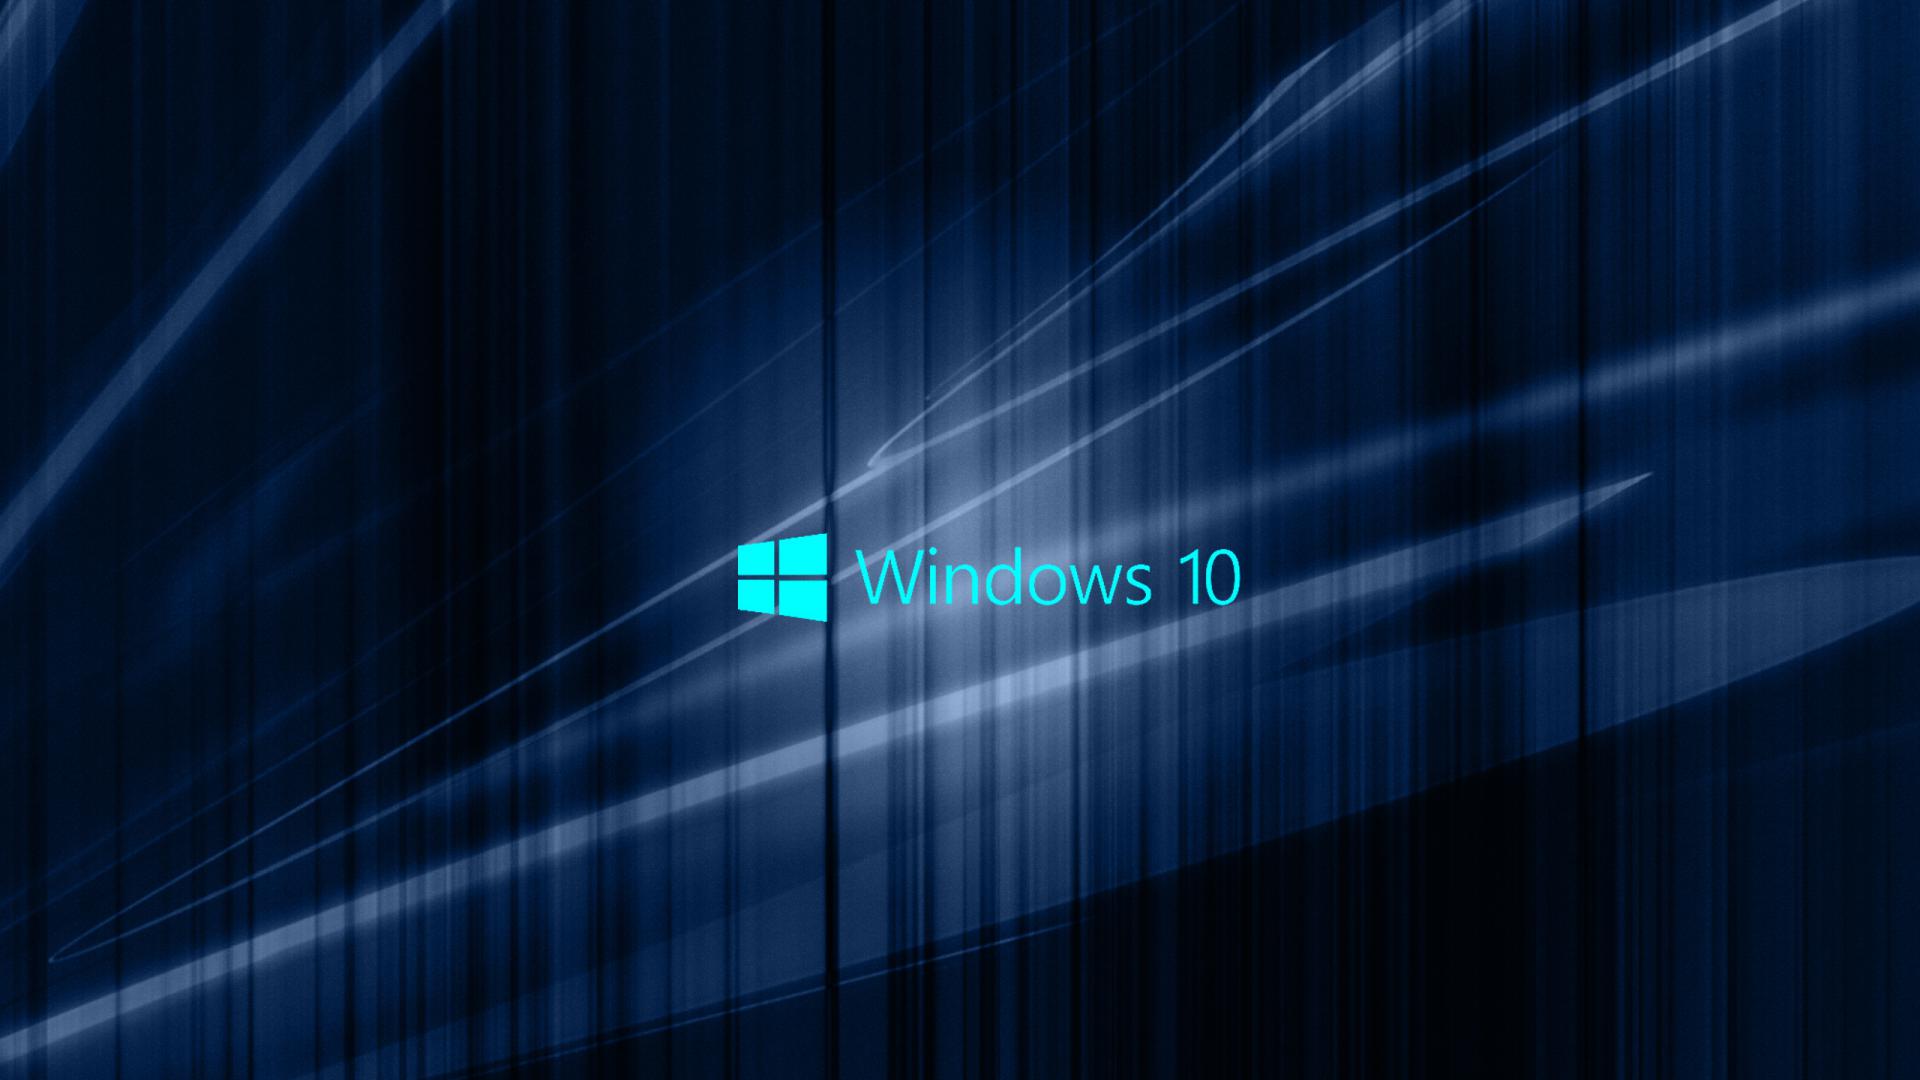 Windows 10 Wallpaper with Blue Abstract Waves HD Wallpapers for Free